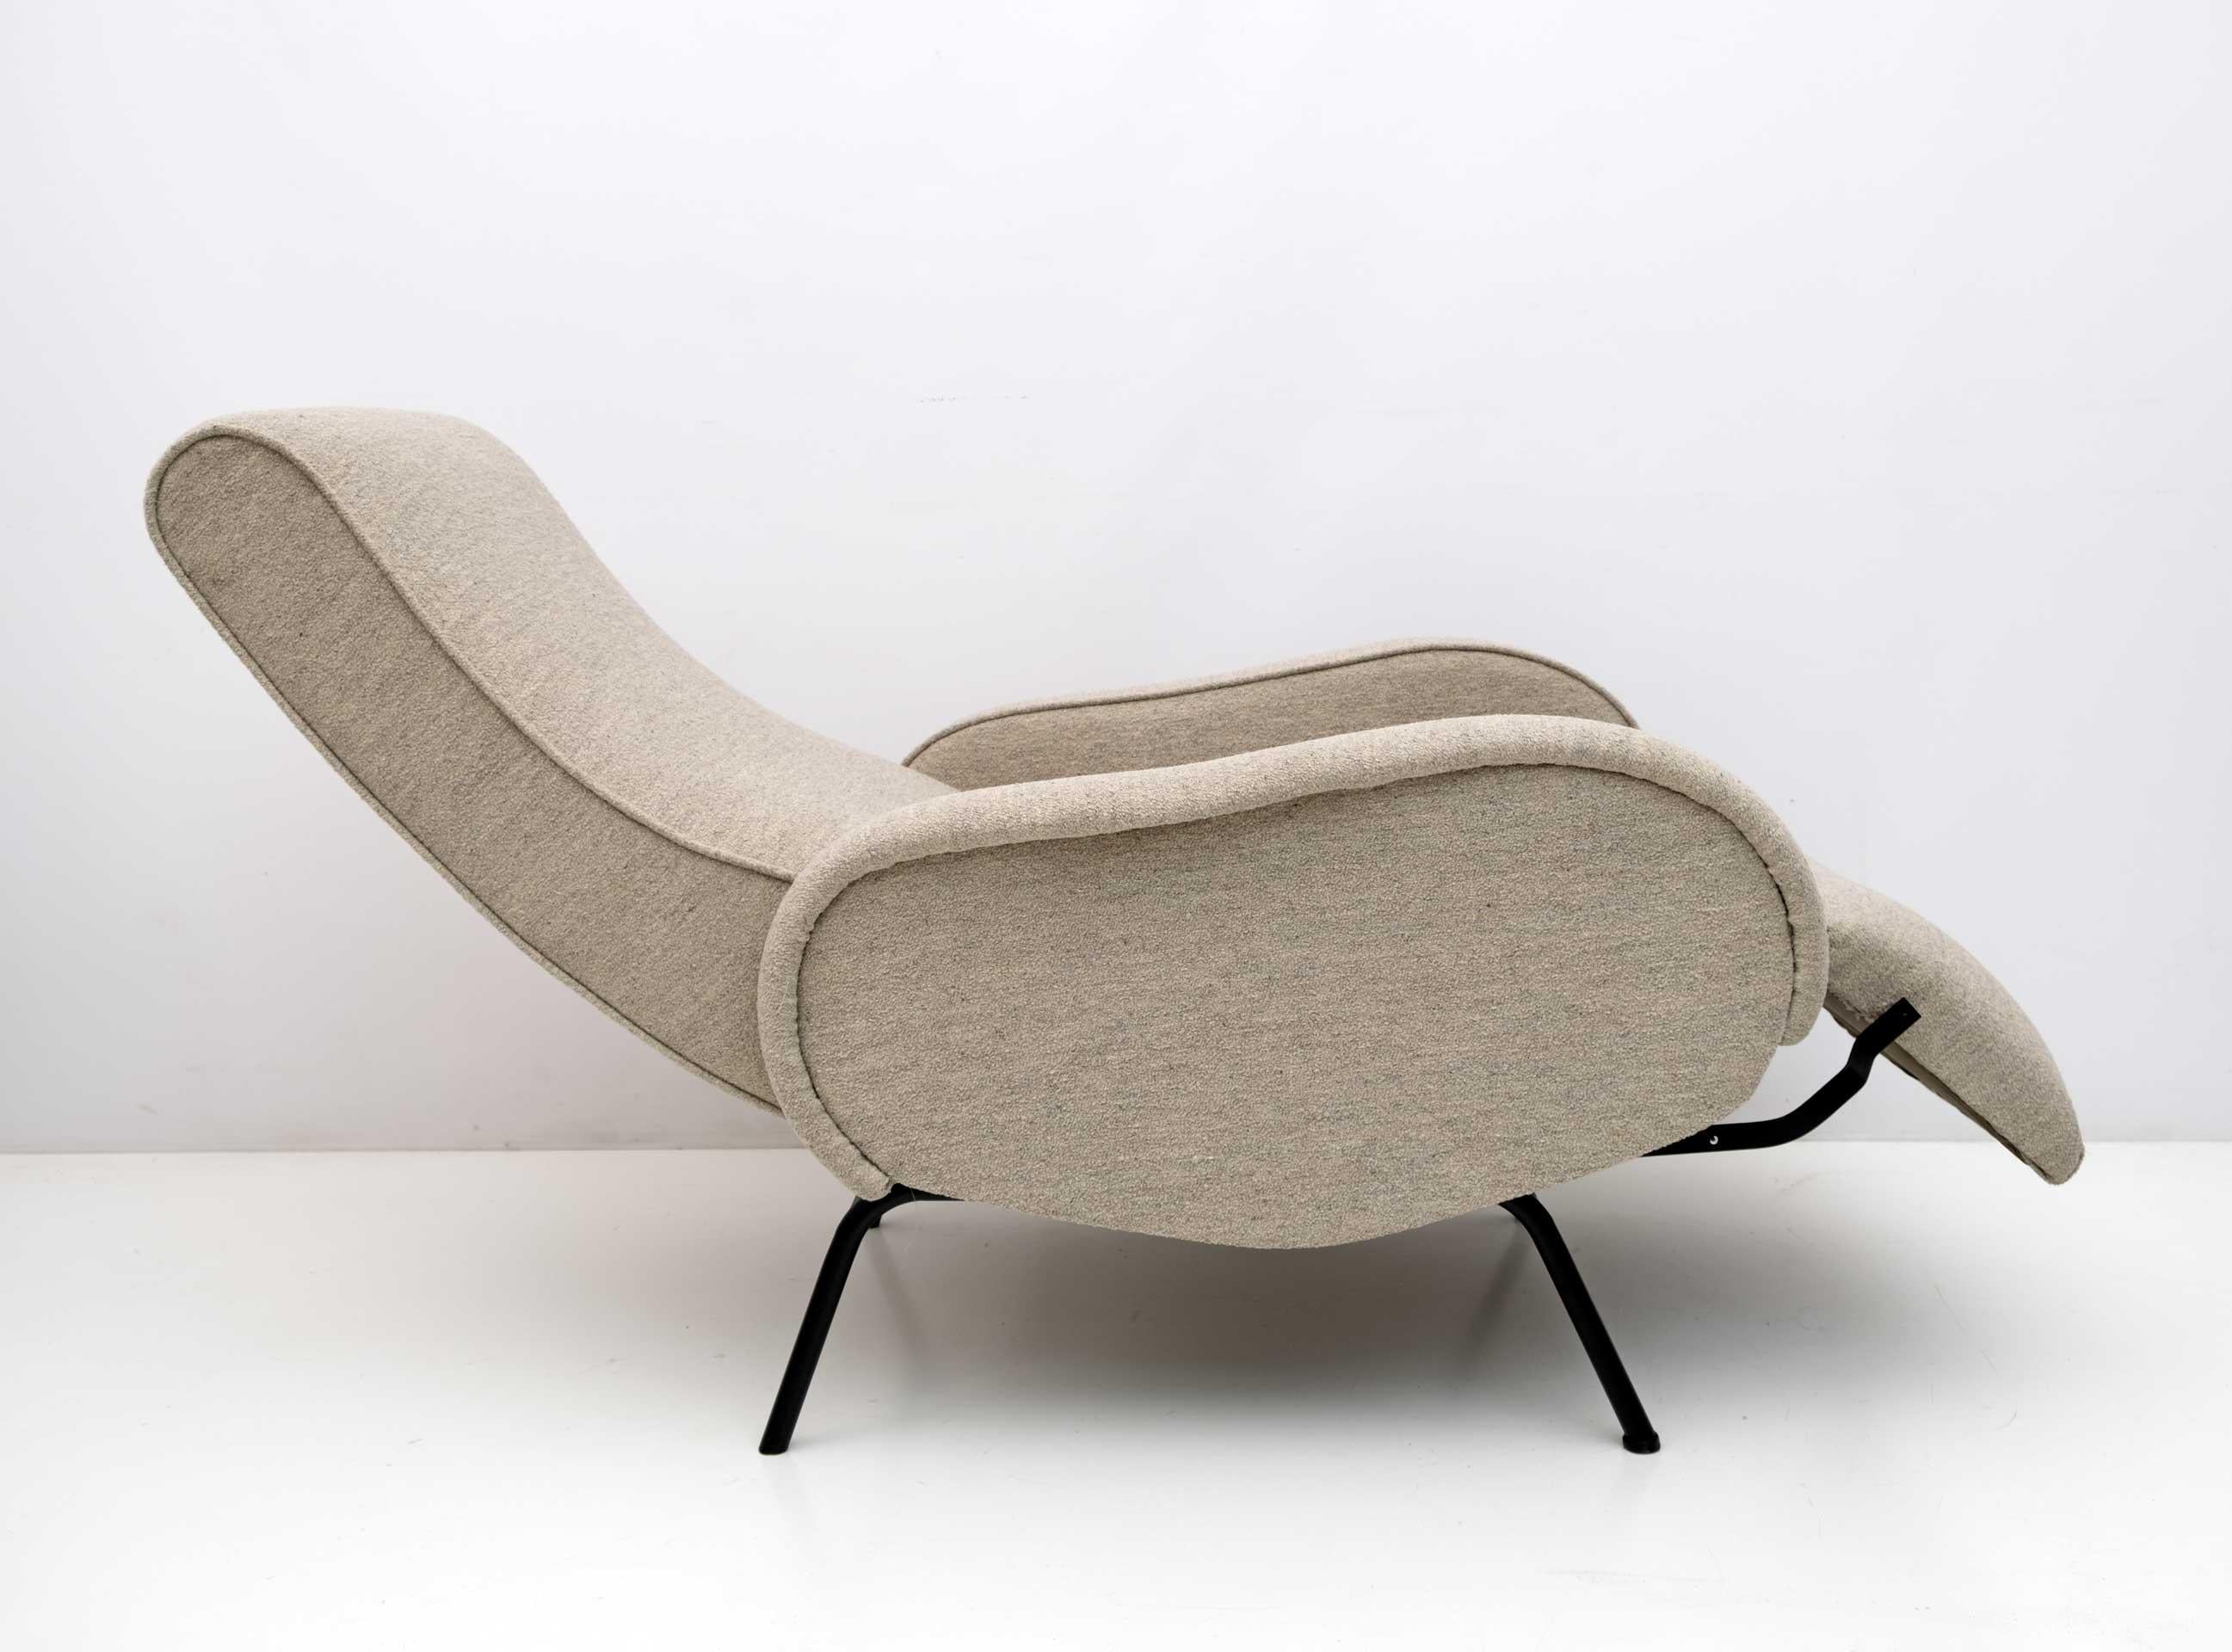 Reclining armchair designed by Marco Zanuso in the 1950s, the armchair has been restored and upholstered in ivory-colored Bouclè fabric
The extended chair measures 150 cm.